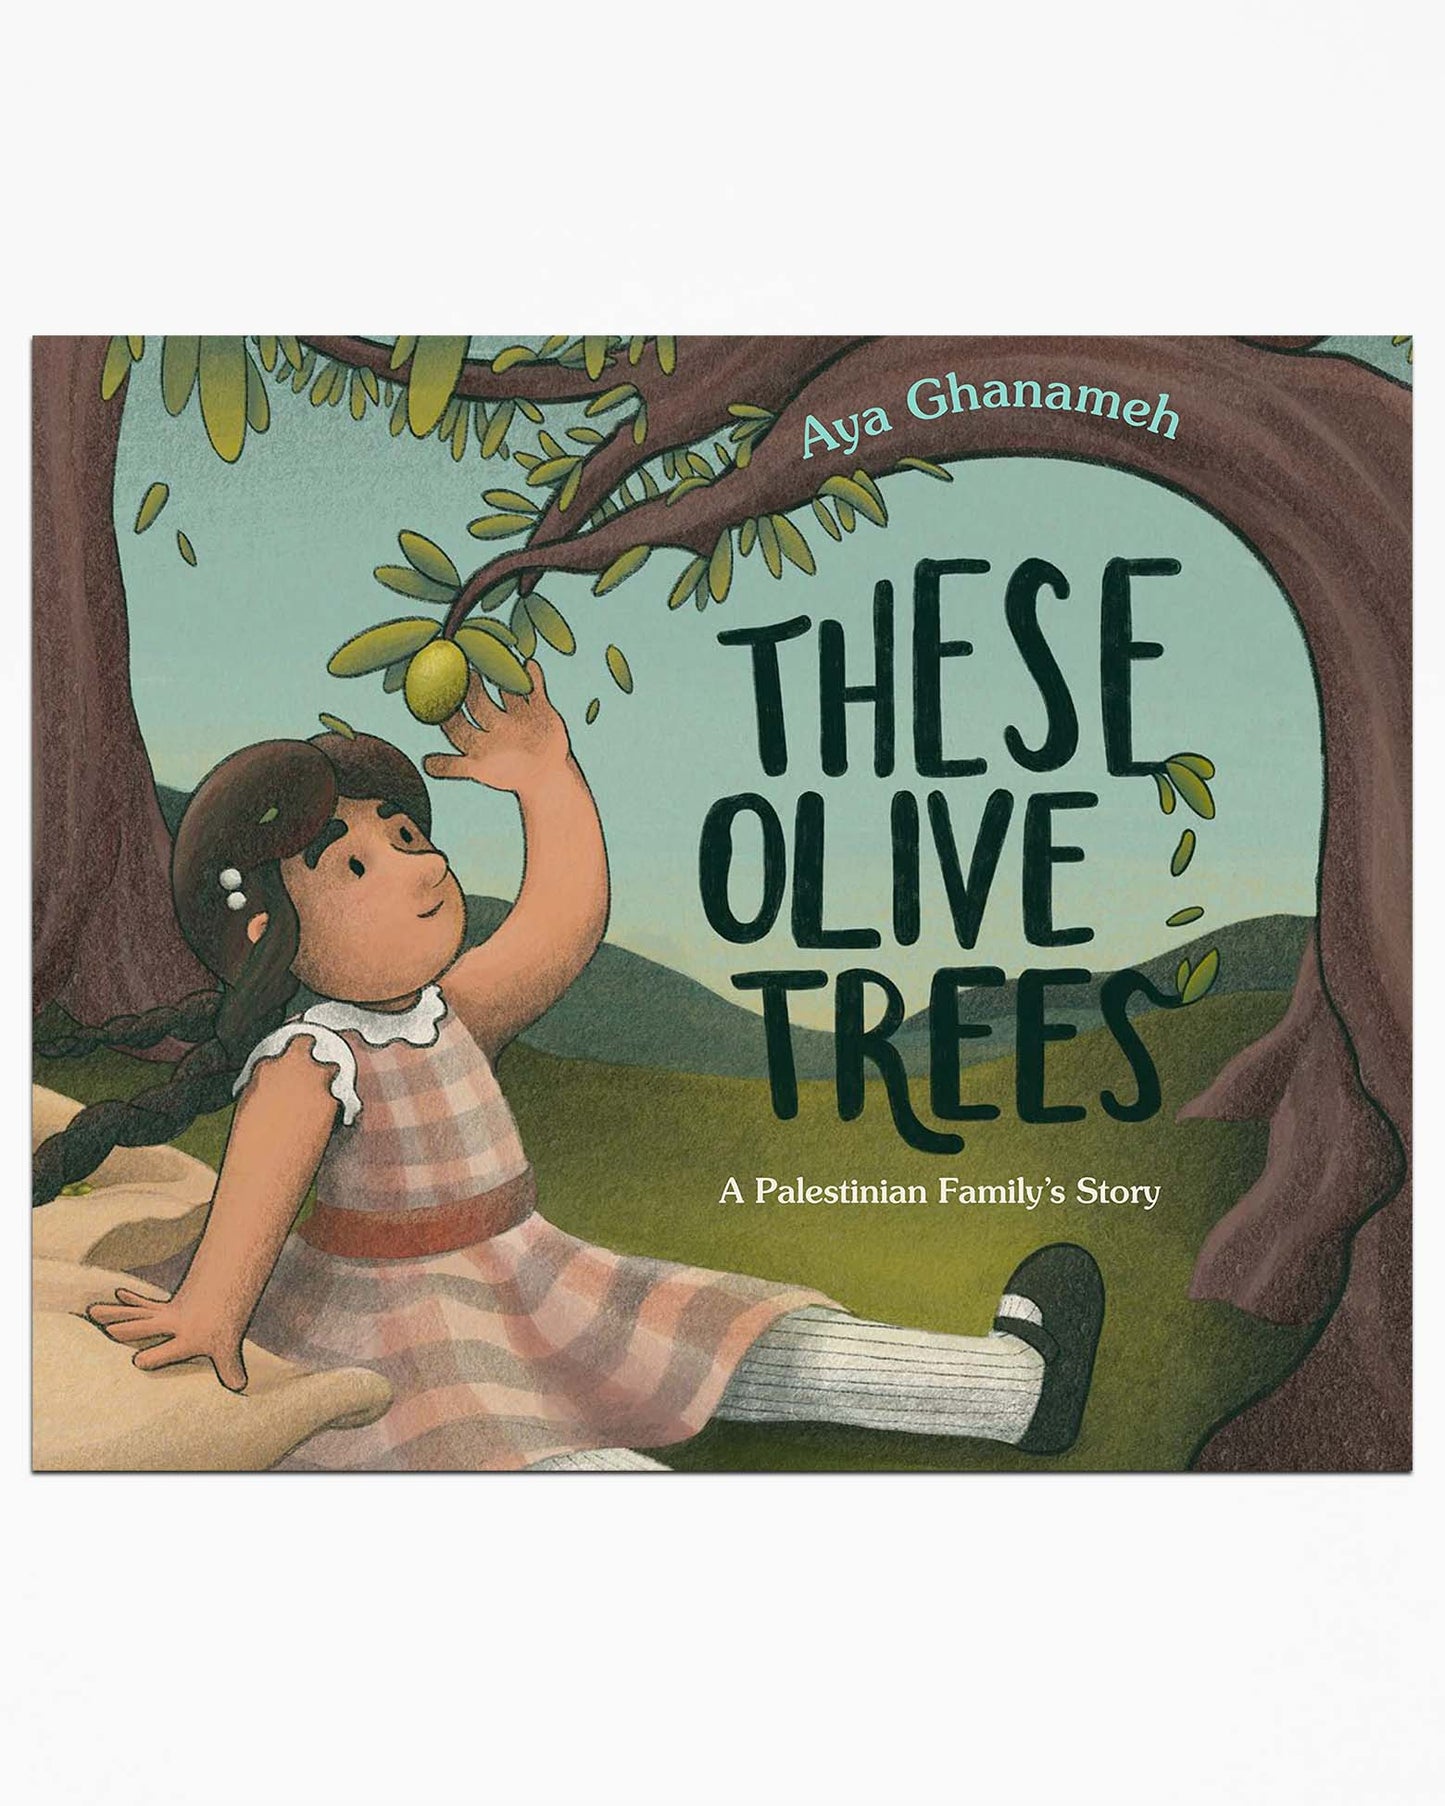 Aya Ghanameh - These Olive Trees